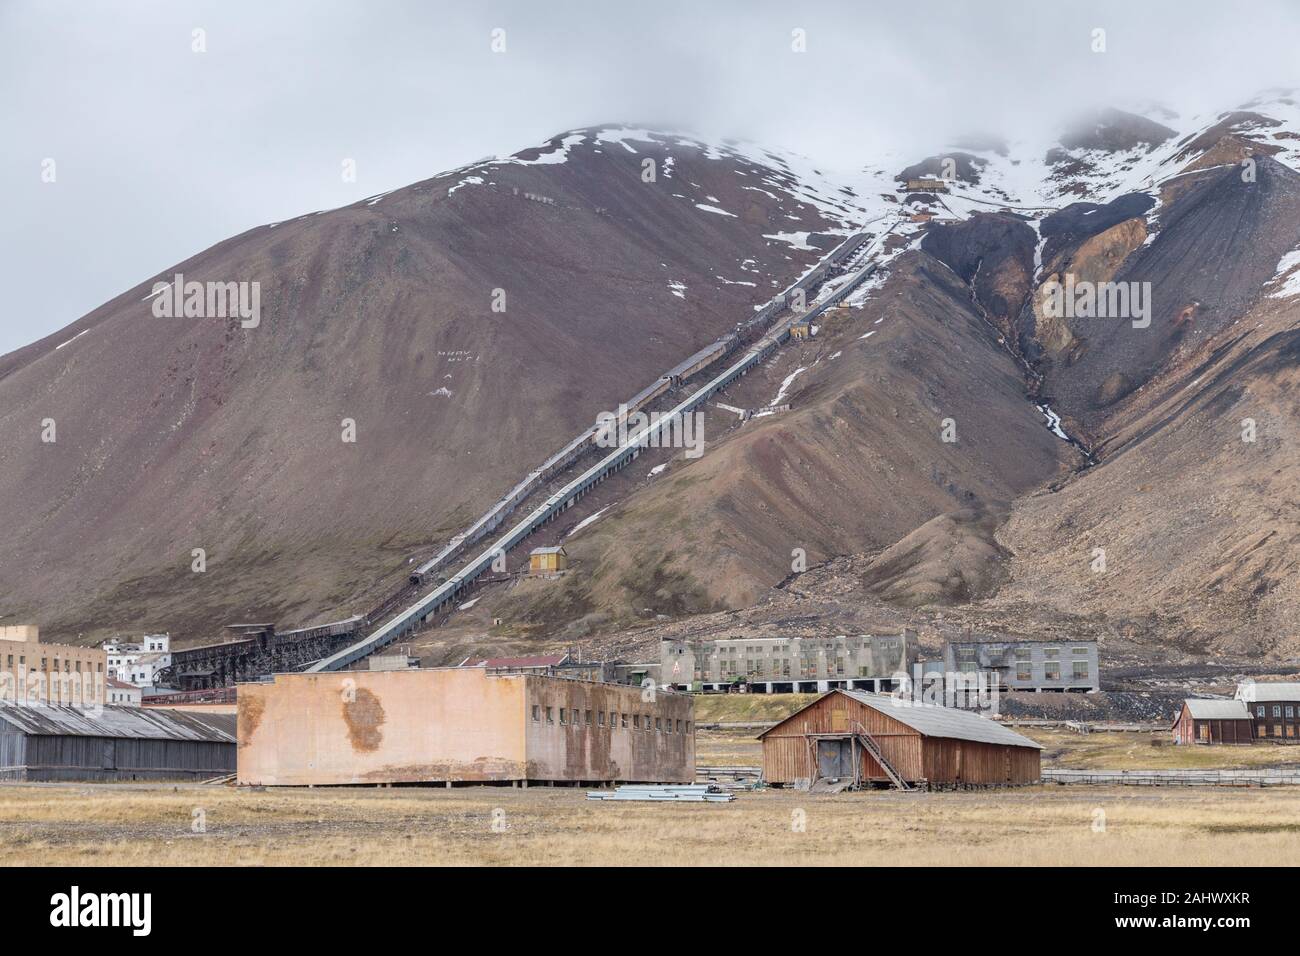 Disused mine workings at Pyramiden, an abandoned Russian coal mining settlement on Spitzbergen on the Norwegian archipelago of Svalbard in the Arctic Stock Photo